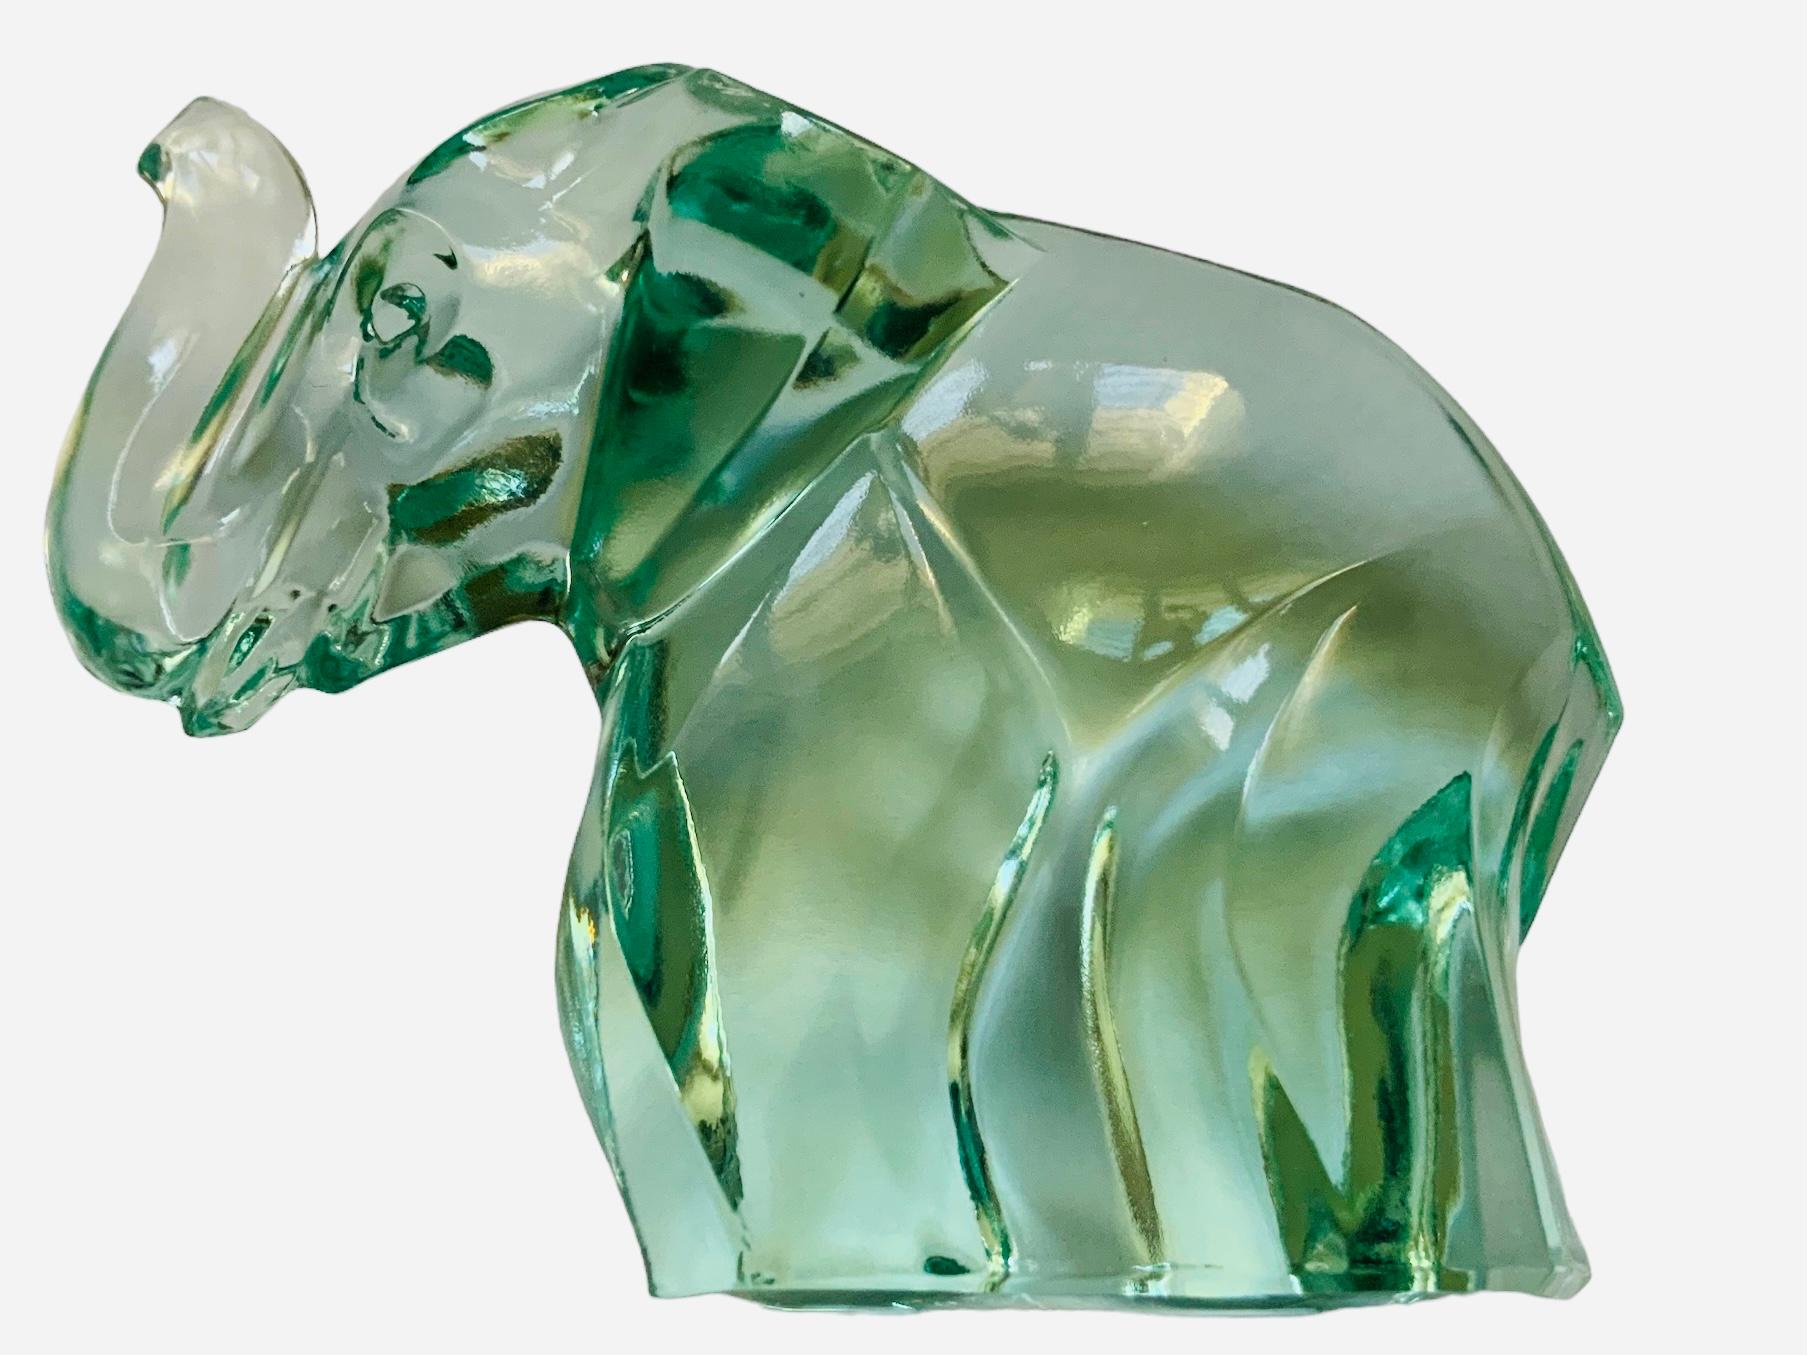 Hand-Crafted Moser Crystal Elephant Sculpture For Sale